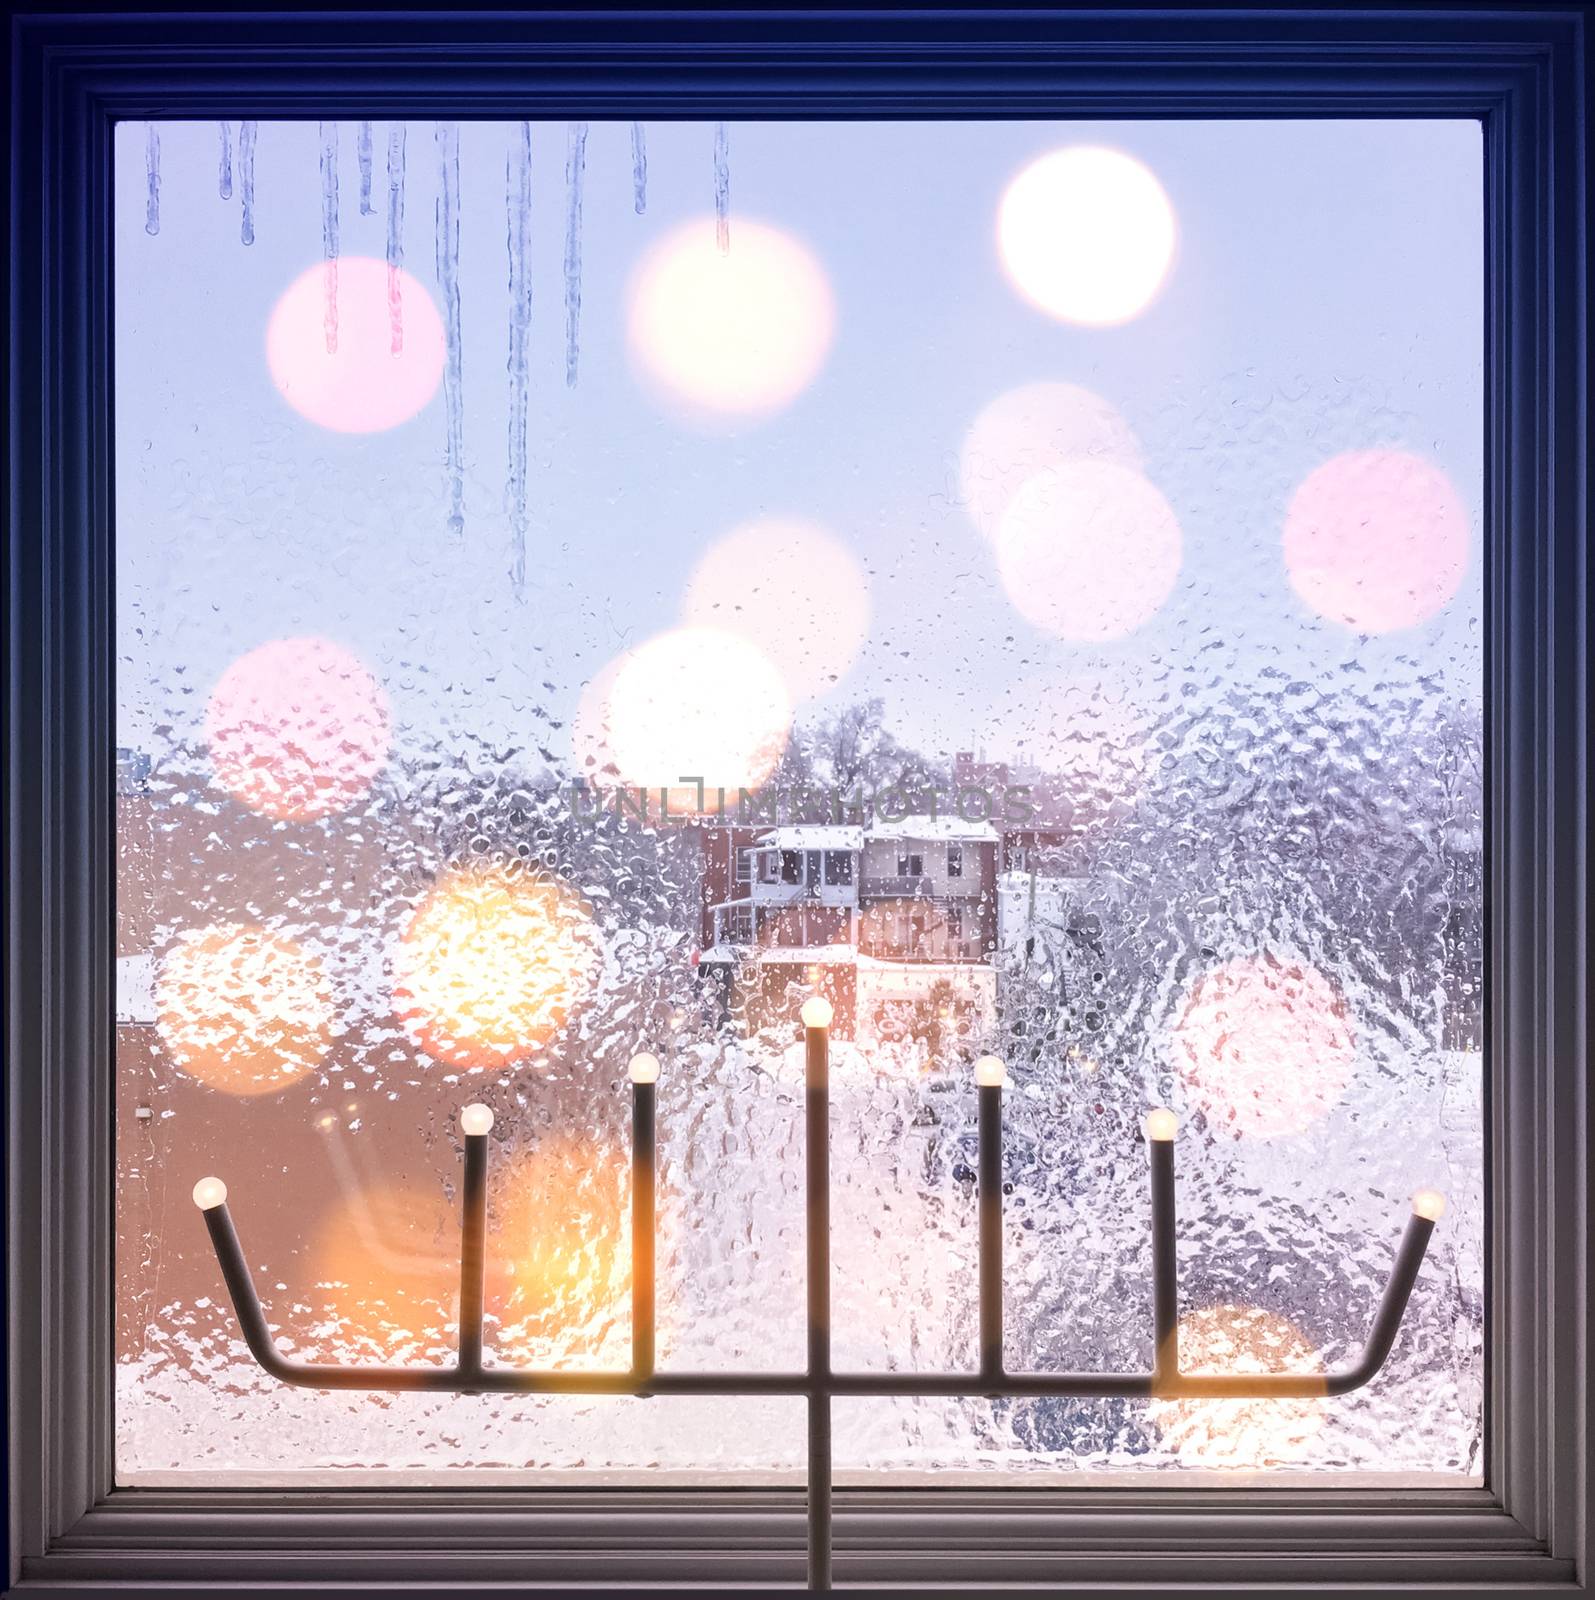 Winter composition with frosted window and lights. Christmas mood.